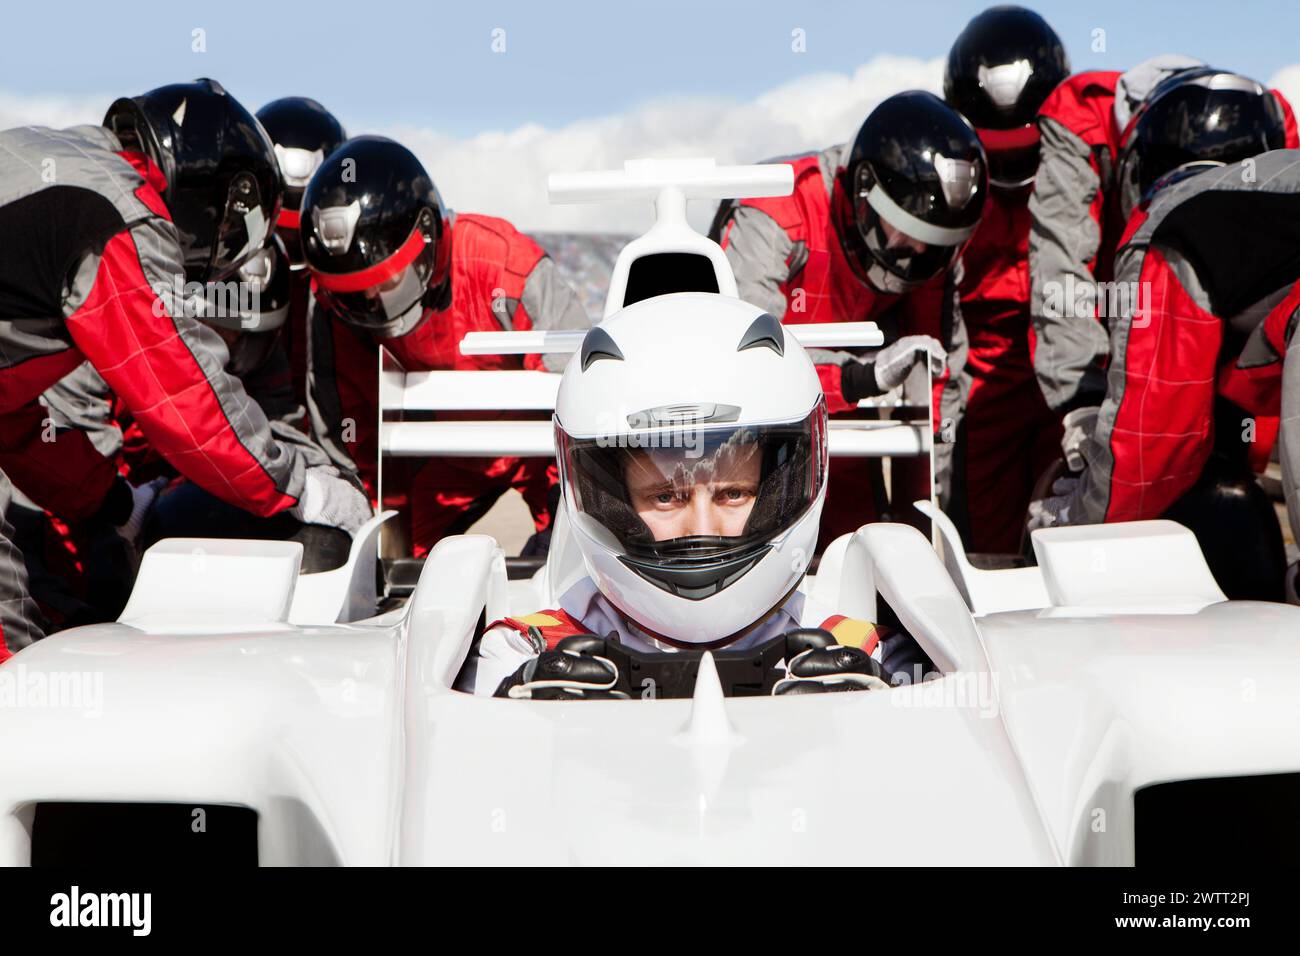 Focused race car driver at the starting line with pit crew team ready for action Stock Photo